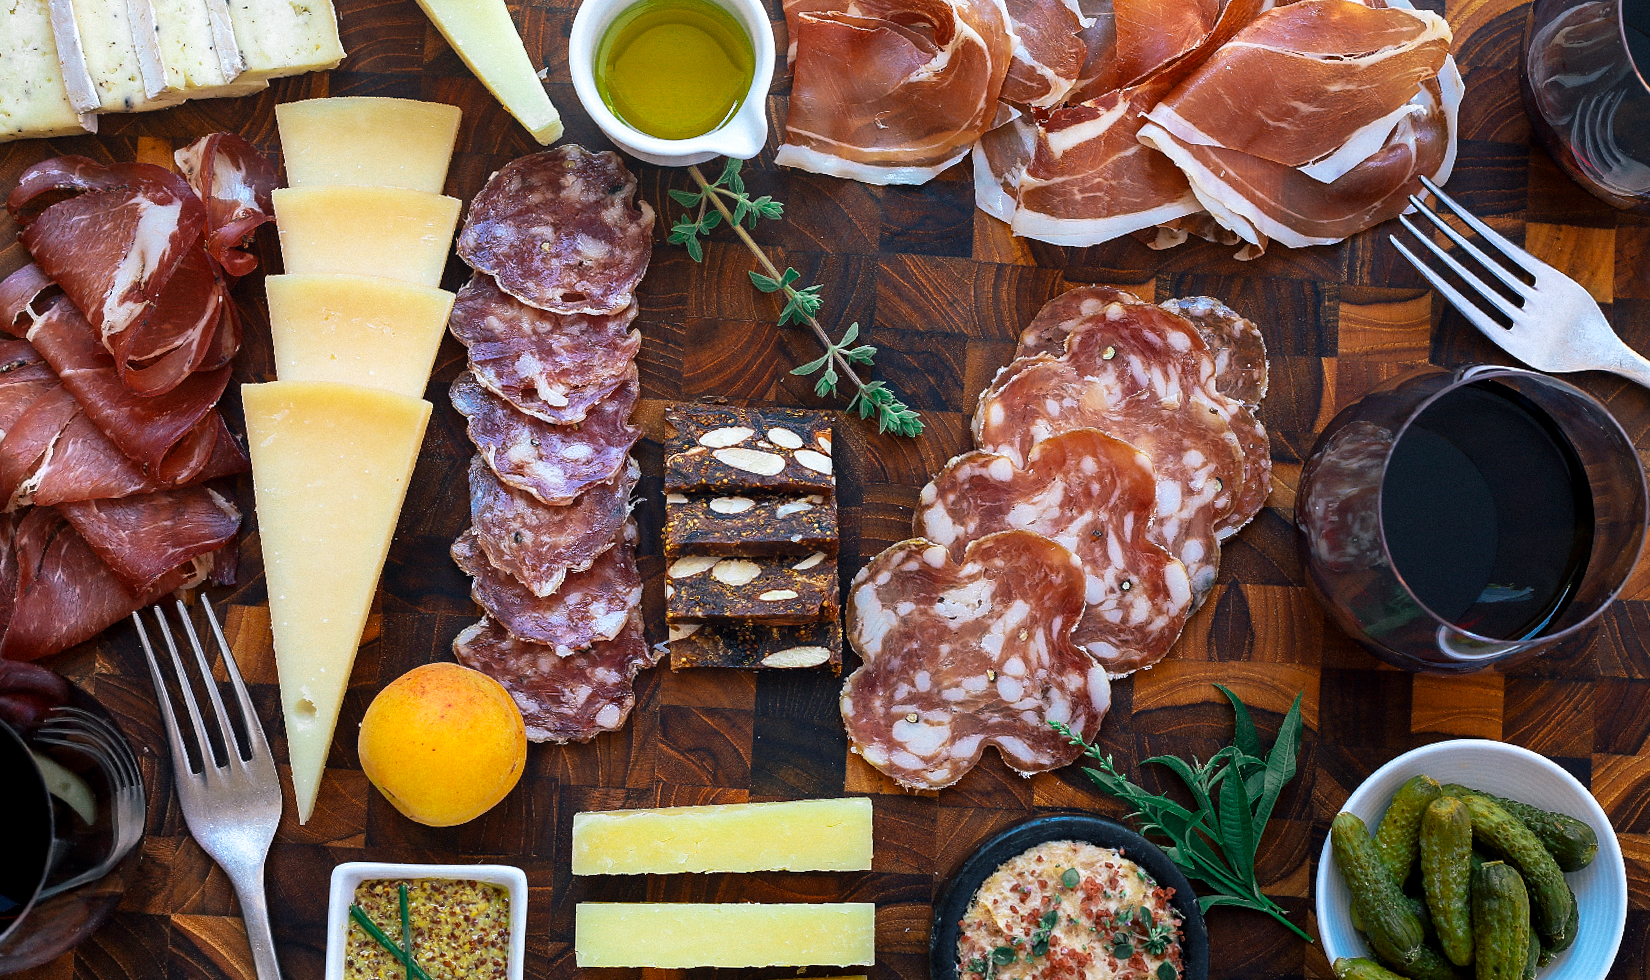 Charcuterie boards are an easy, quick appetizer with wines